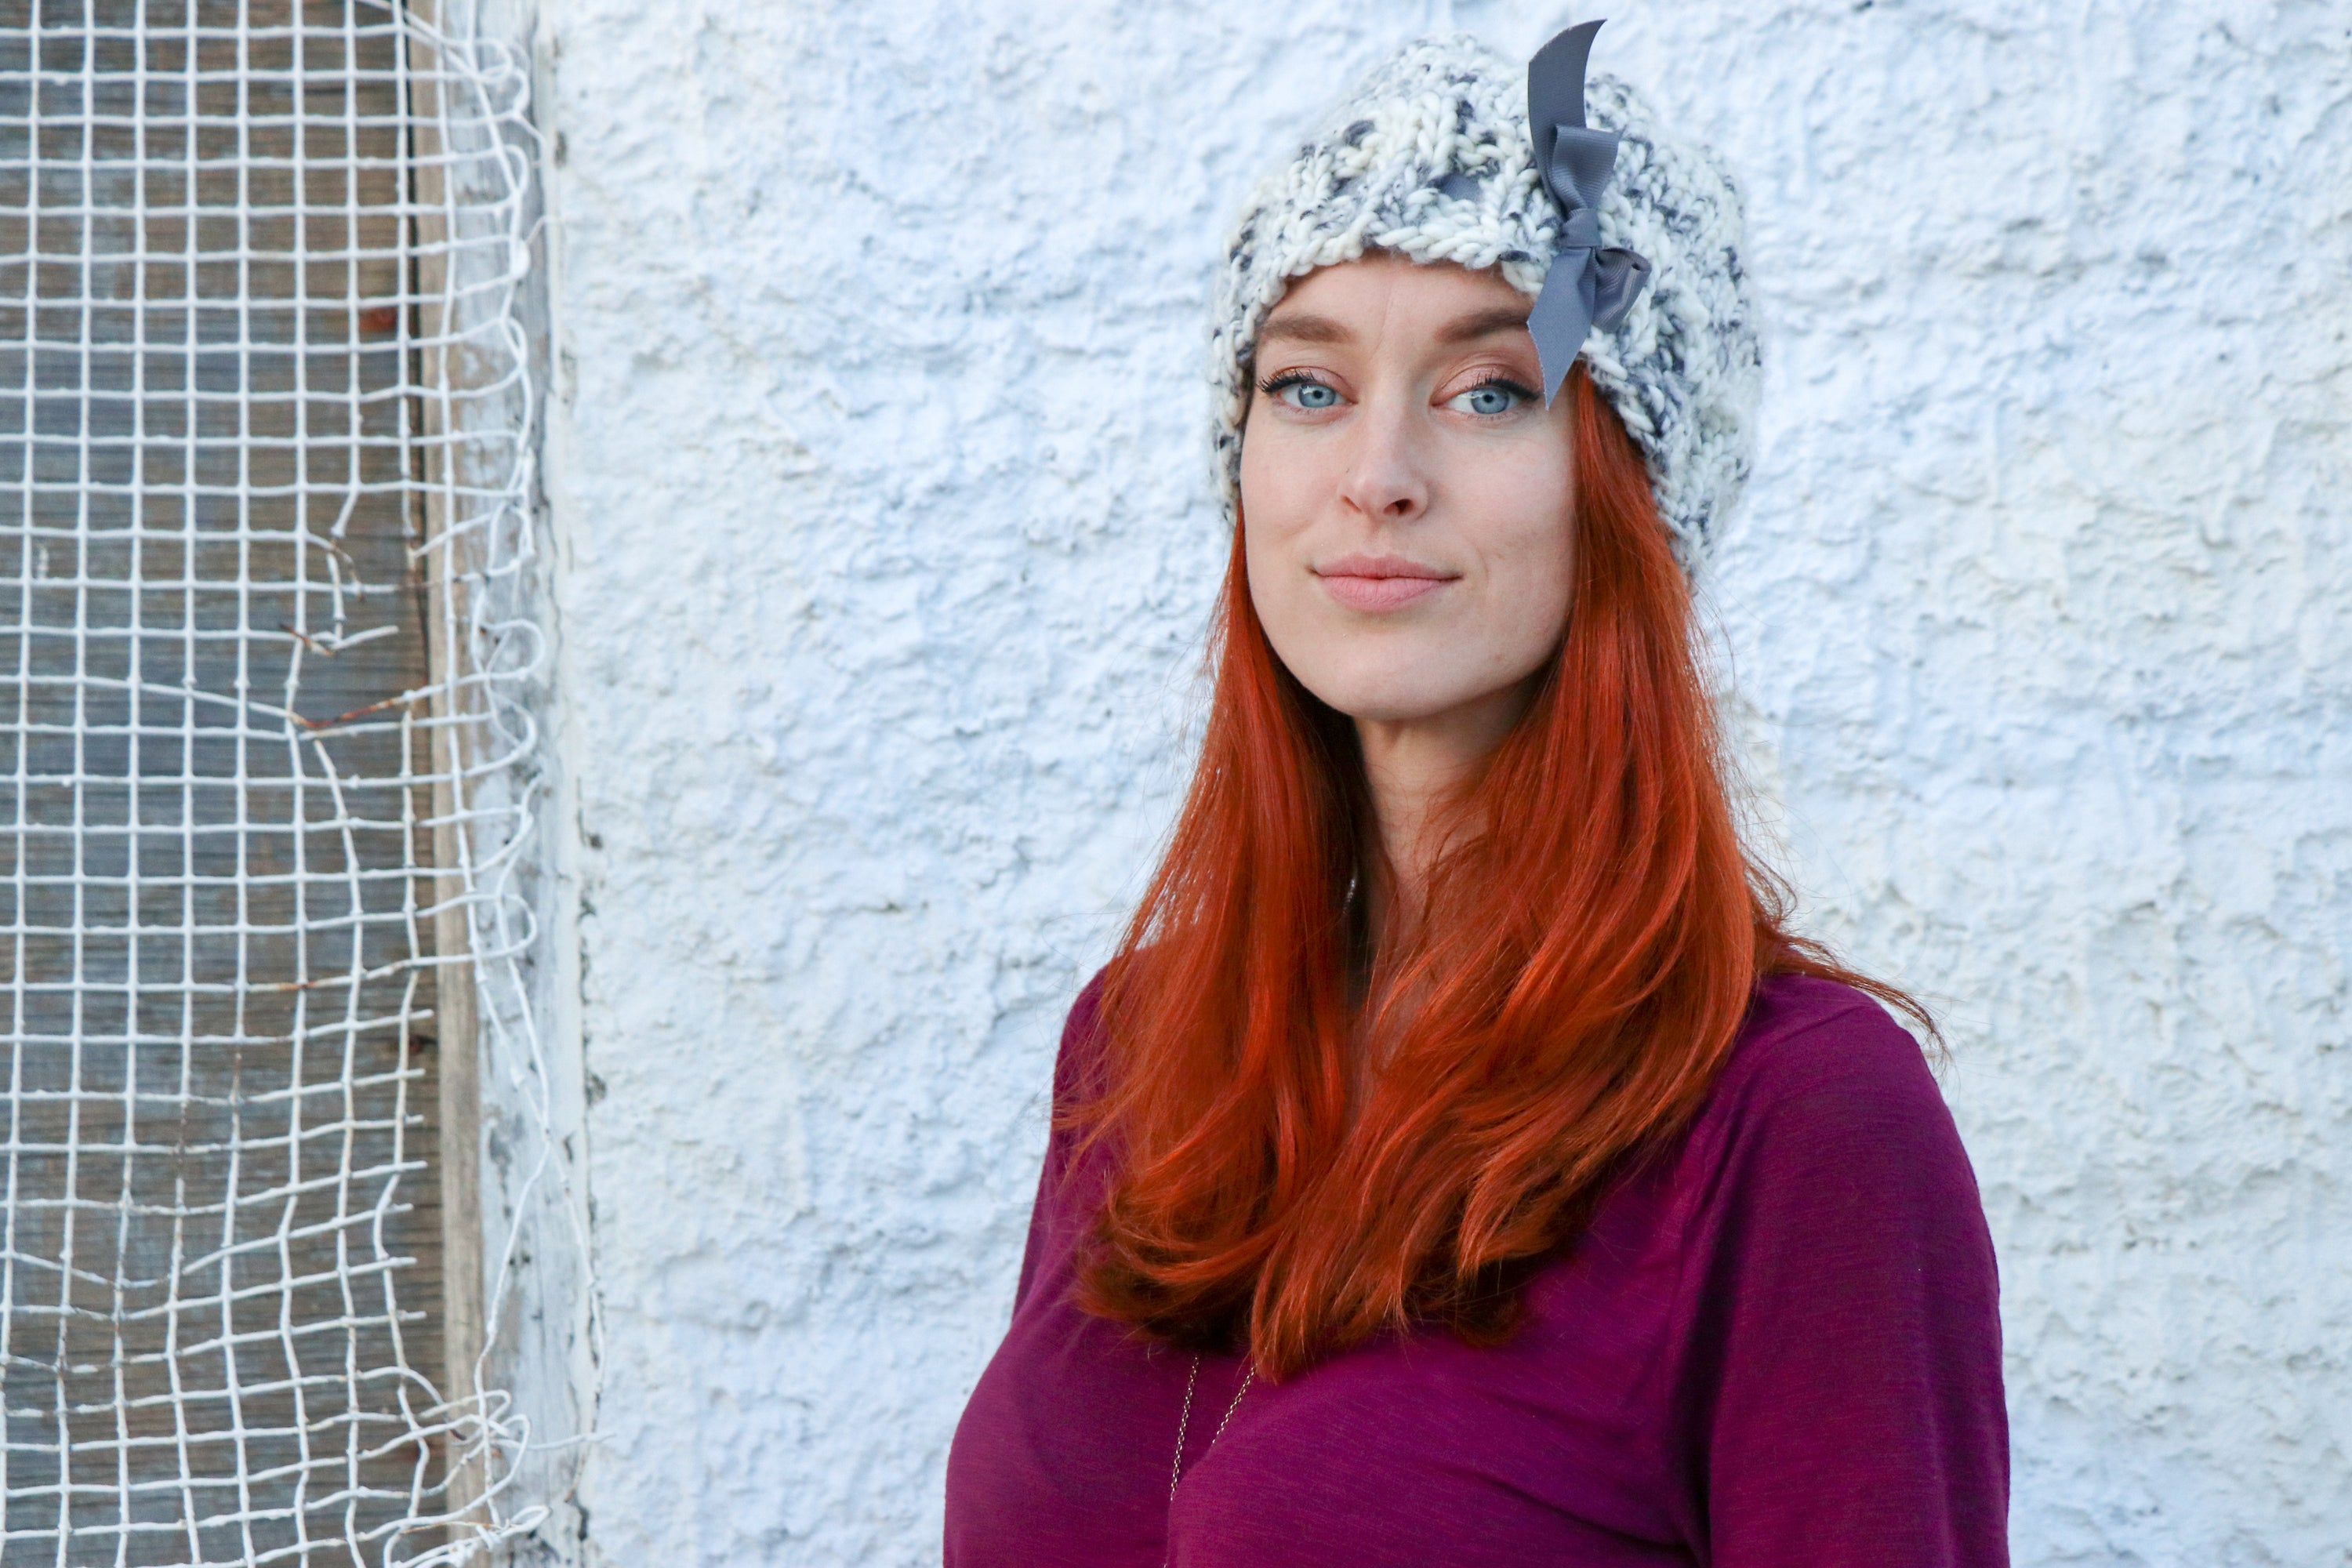 The Daisy : Hand Knit Slouchy Hat with Ribbon